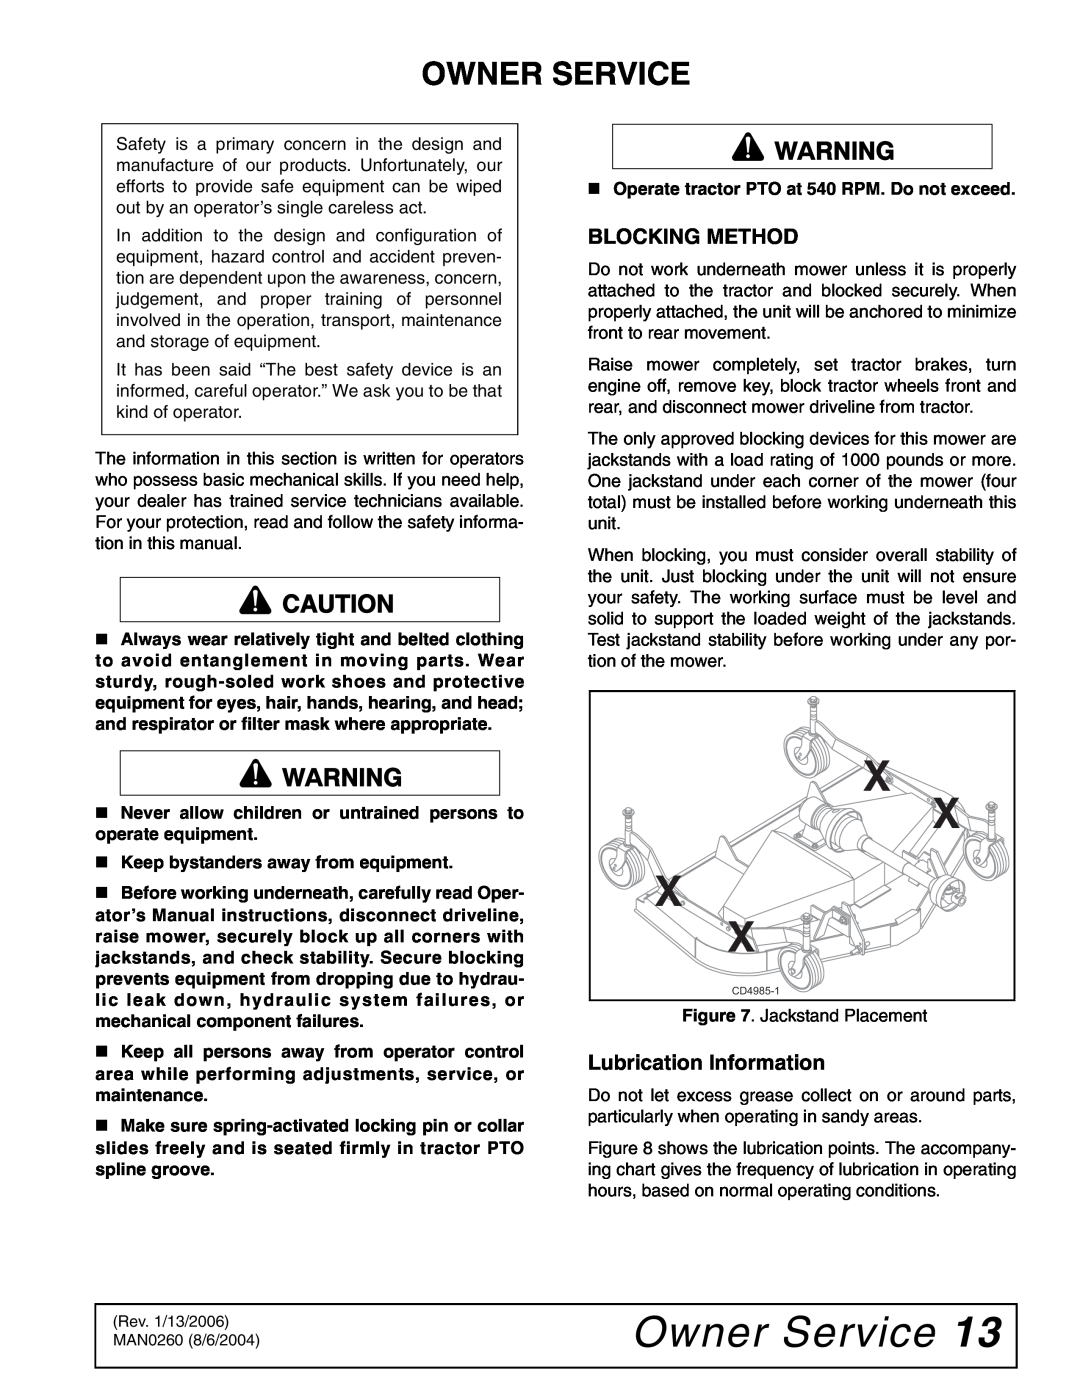 Woods Equipment RDC54, RD60, RD72 manual Owner Service, Blocking Method, Lubrication Information 